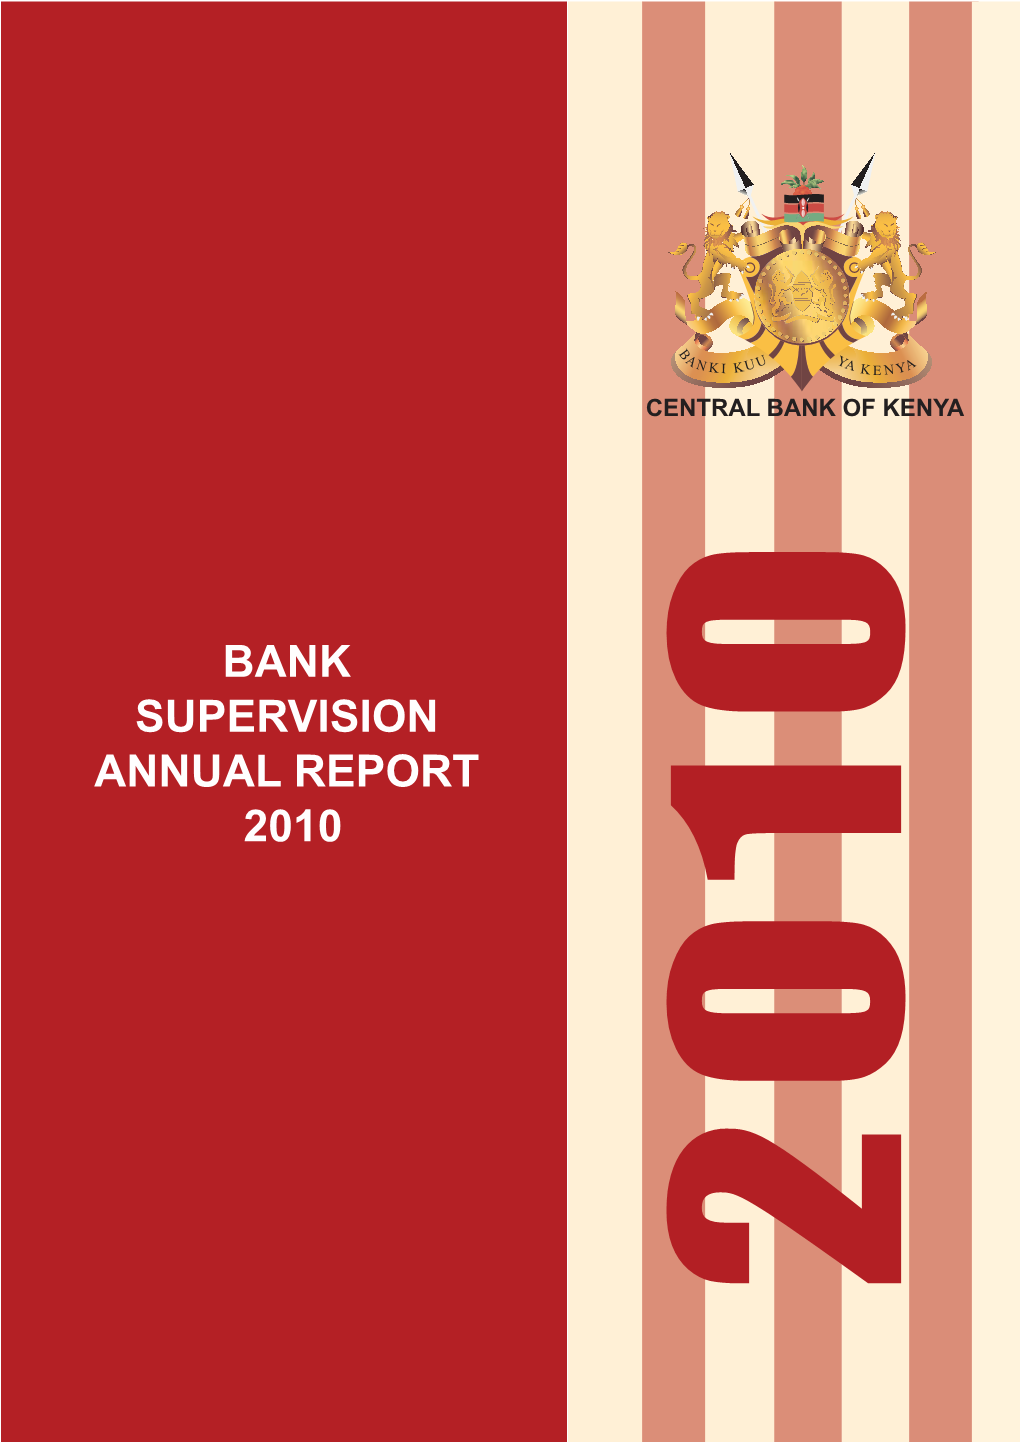 Bank Supervision Annual Report 2010